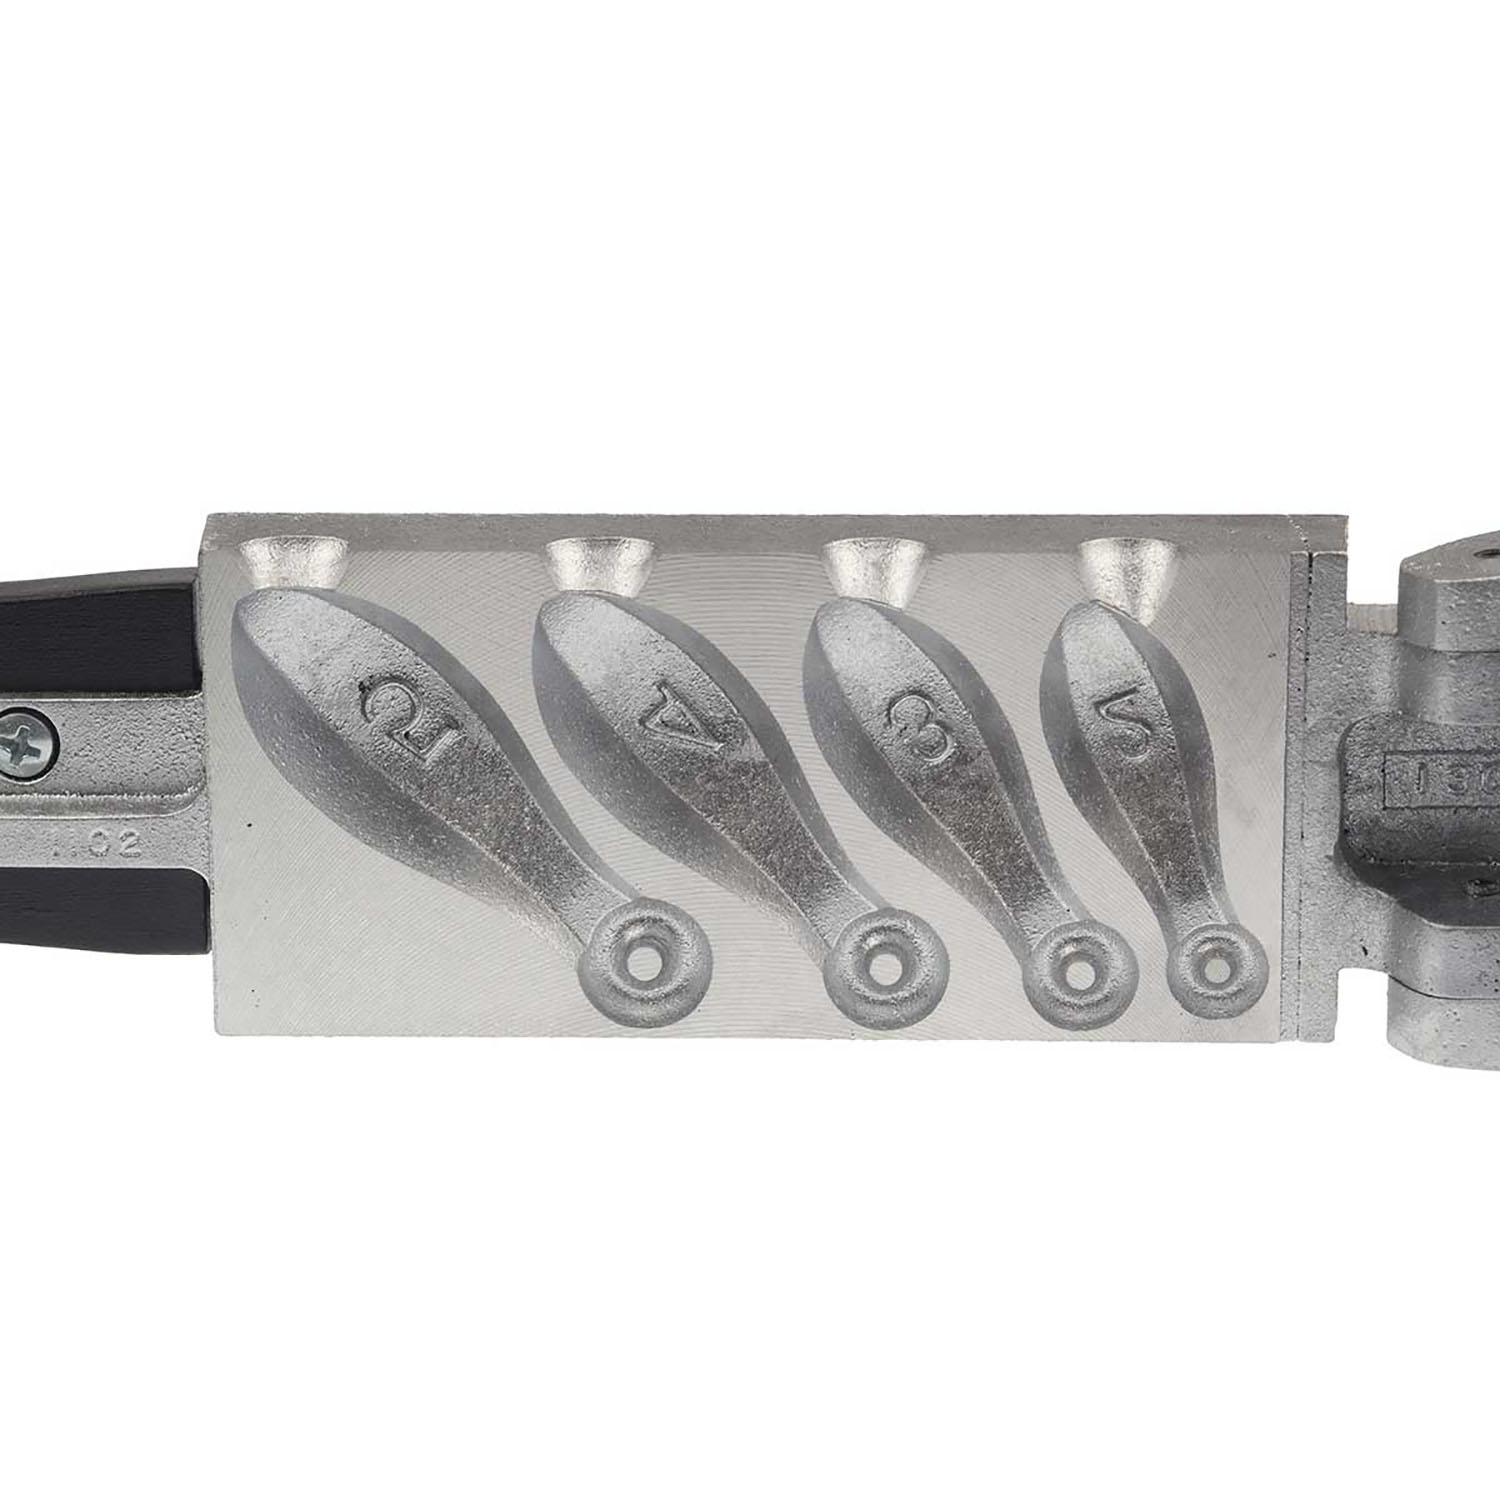 Do-It Molds Bank Sinker Mold , Up to $5.01 Off with Free S&H — CampSaver